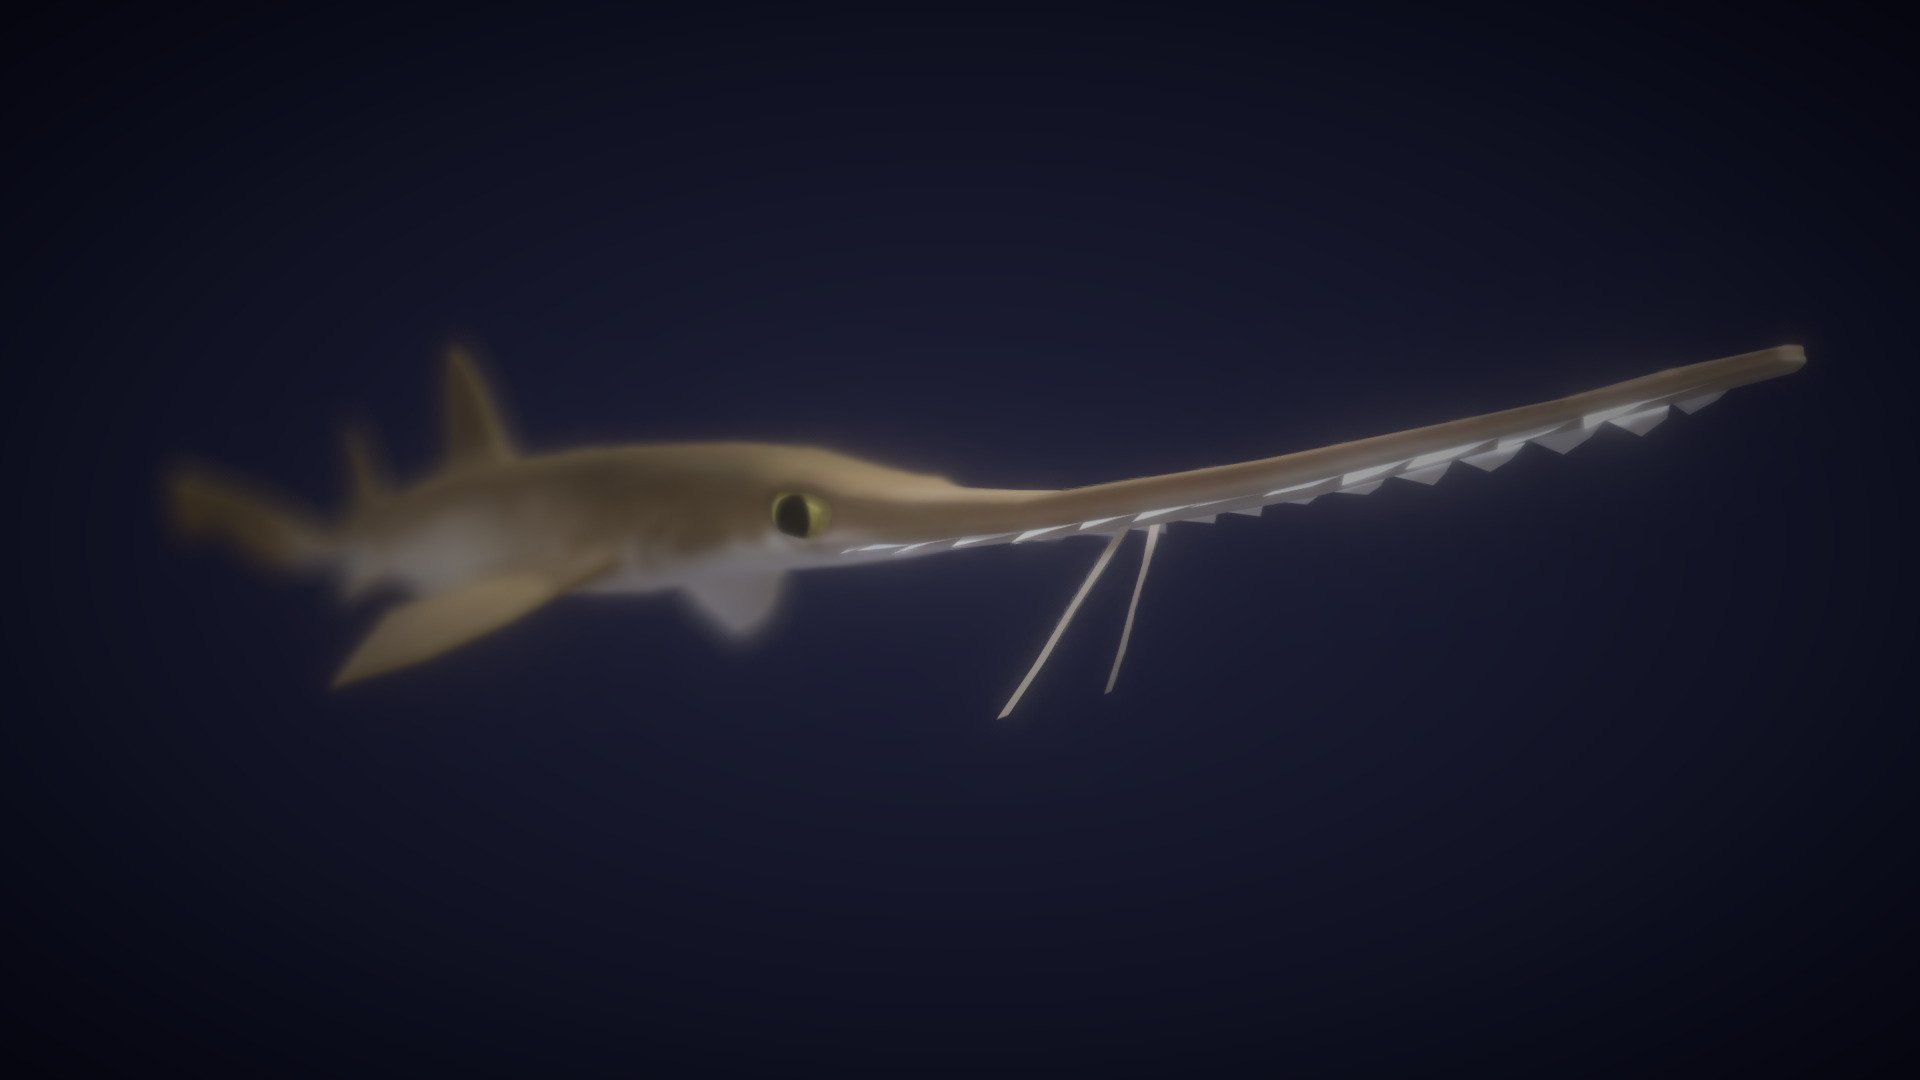 sawsharks have elongated snouts, edged with sharp teeth. despite looking similar to a sawfish, sawsharks are not related to sawfish. these fish are usually found in deep, offshore waters, with the Japanese sawshark being found around Japan, Korea, Taiwan, and northern China 3d model